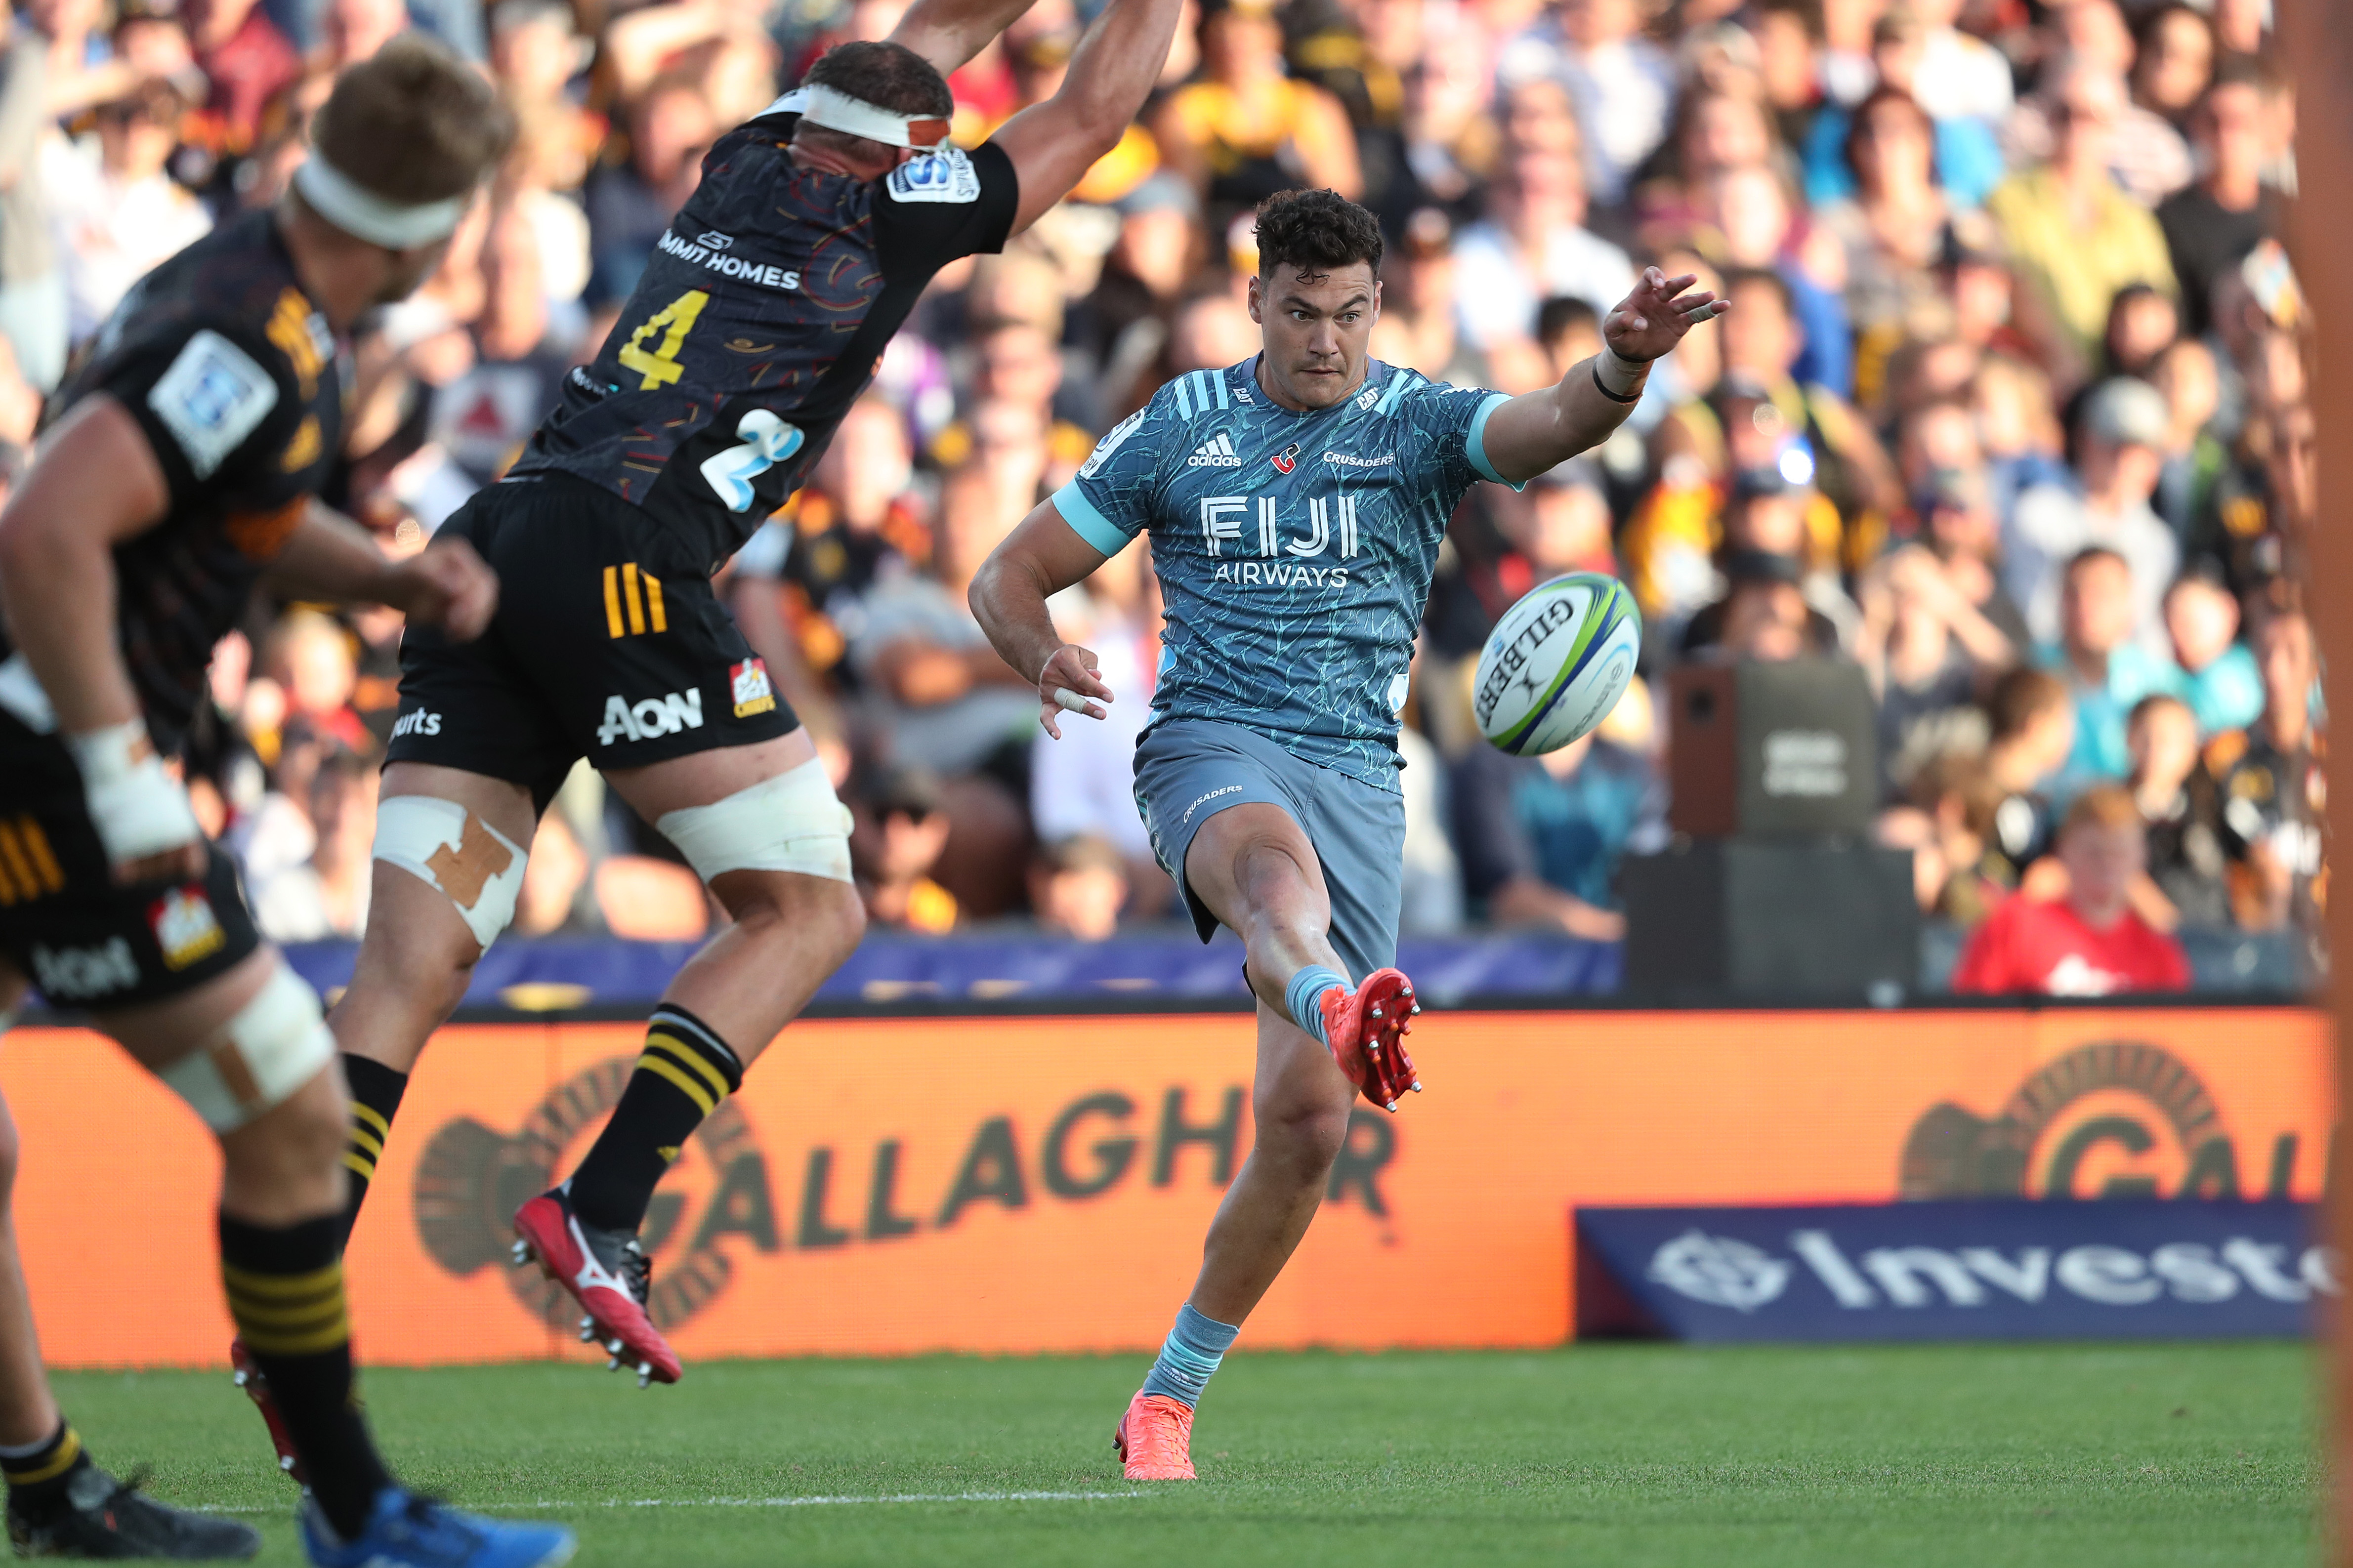 PREVIEW Investec Super Rugby Aotearoa